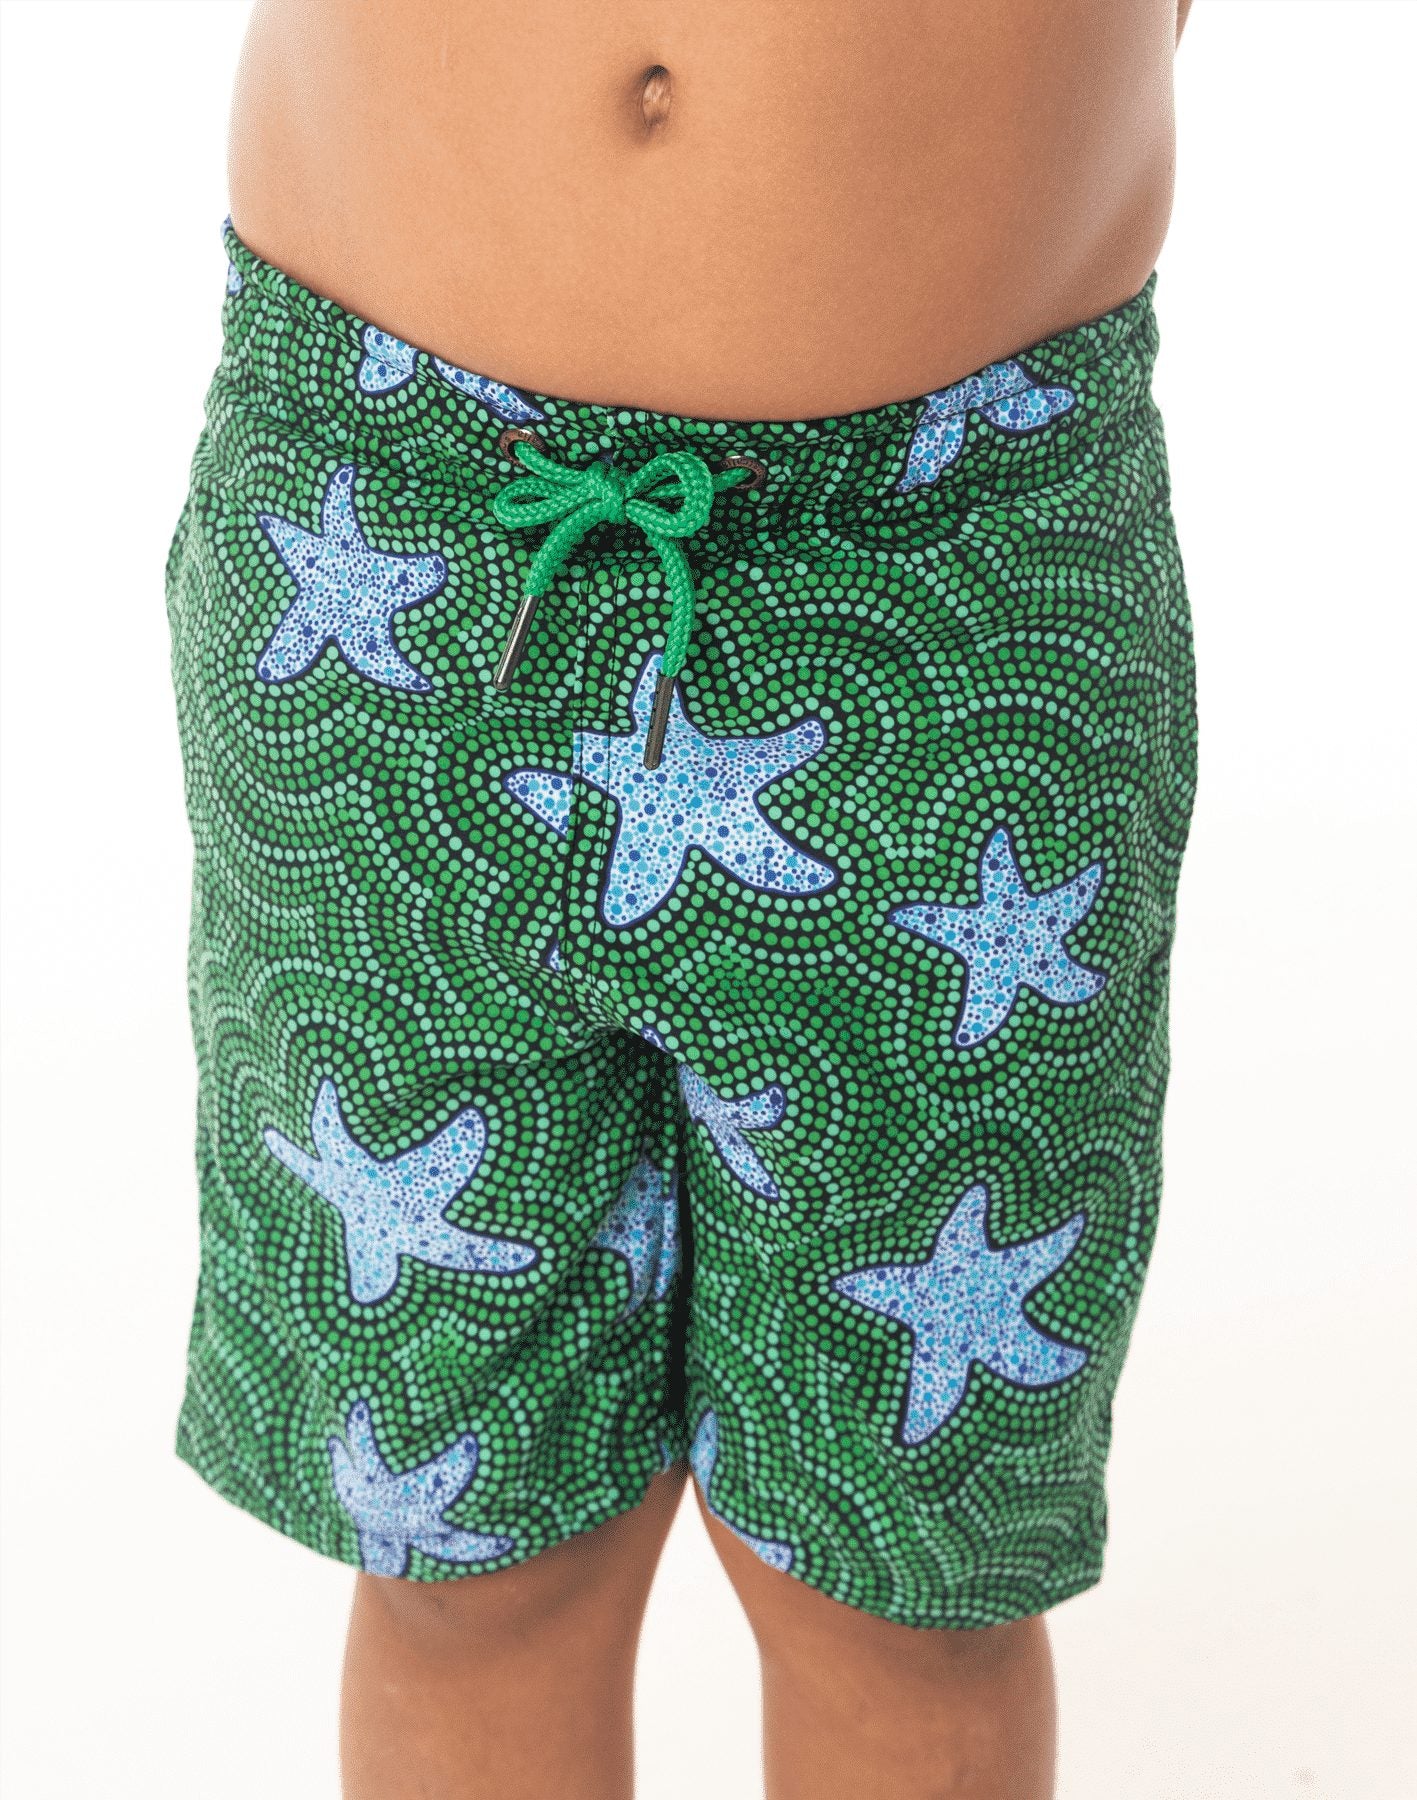 SevenC's Kids' Recycled Polyester Shorts in Star Fish Print - Front View